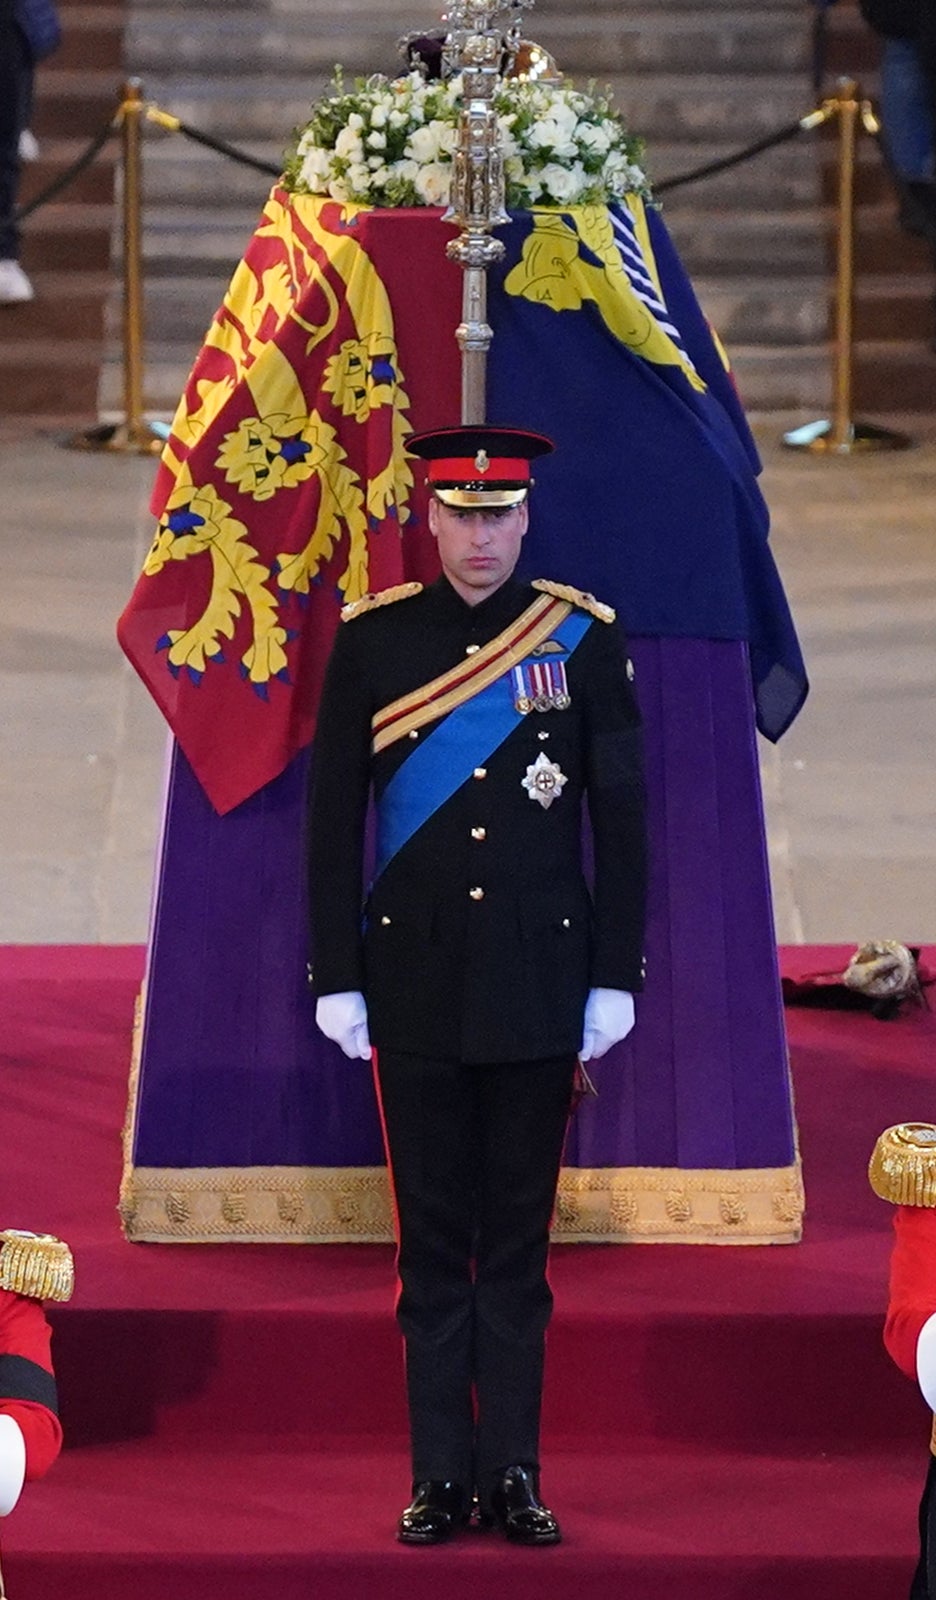 The Prince of Wales stands vigil at the head of the coffin of his late grandmother